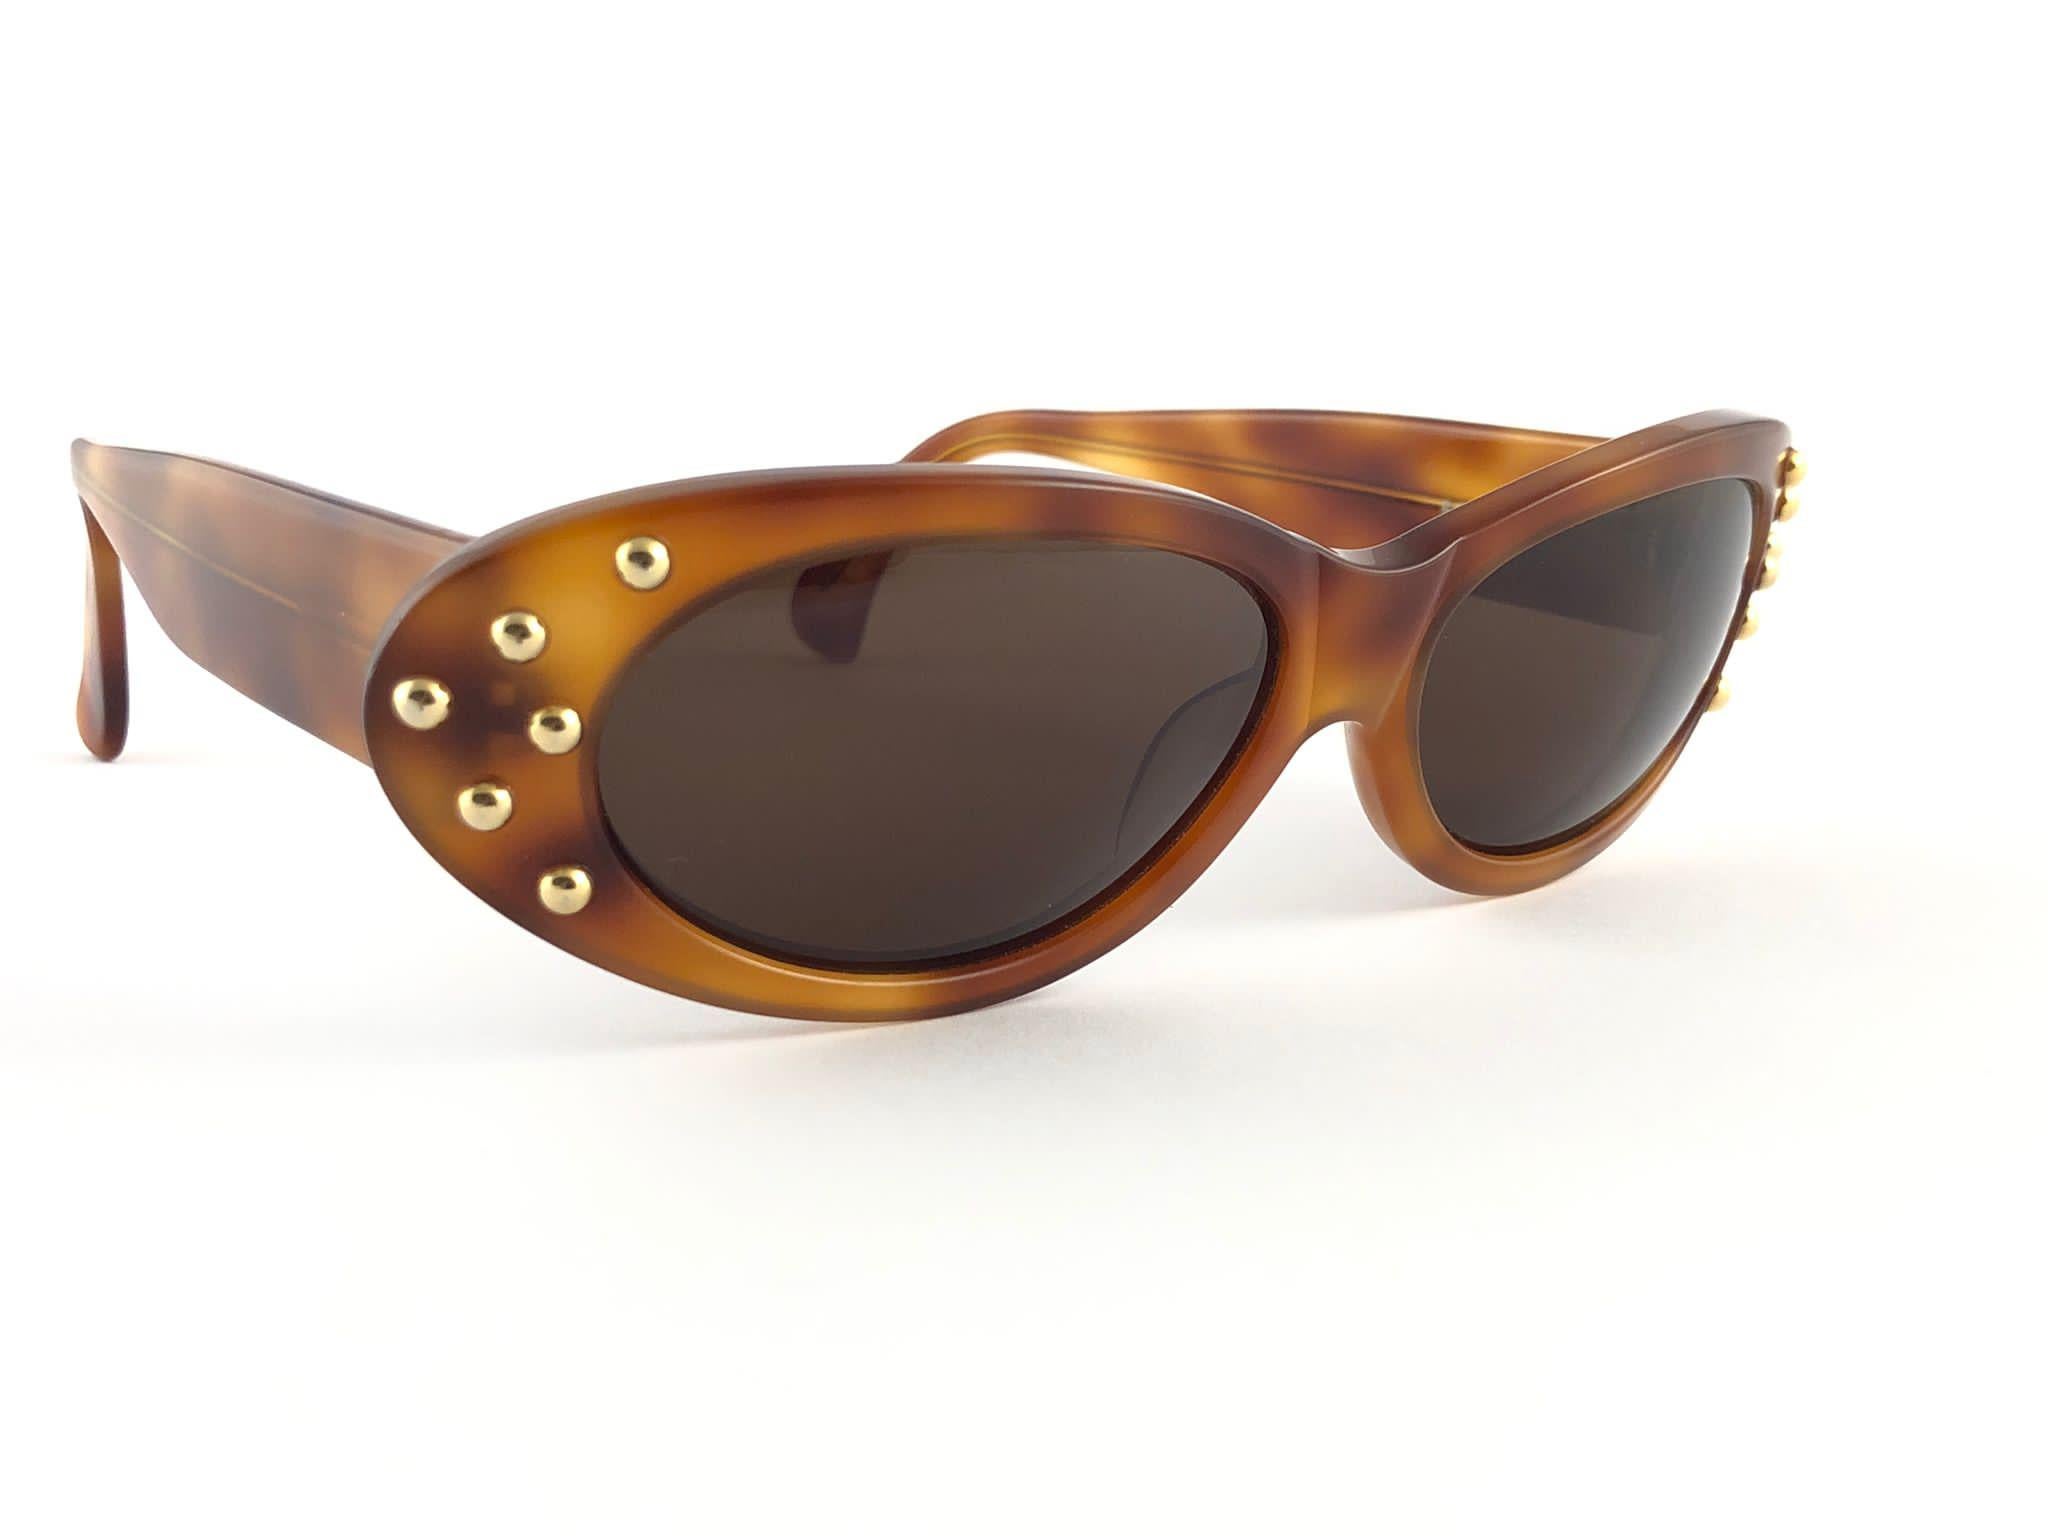 Seldom Vintage Rare Claude Montana 1989 AM585053 tortoise and gold accents sculptured frame.

Medium brown lenses.

Please consider that this item is nearly 40 years old so it could show minor sign of wear due to storage.

Made in